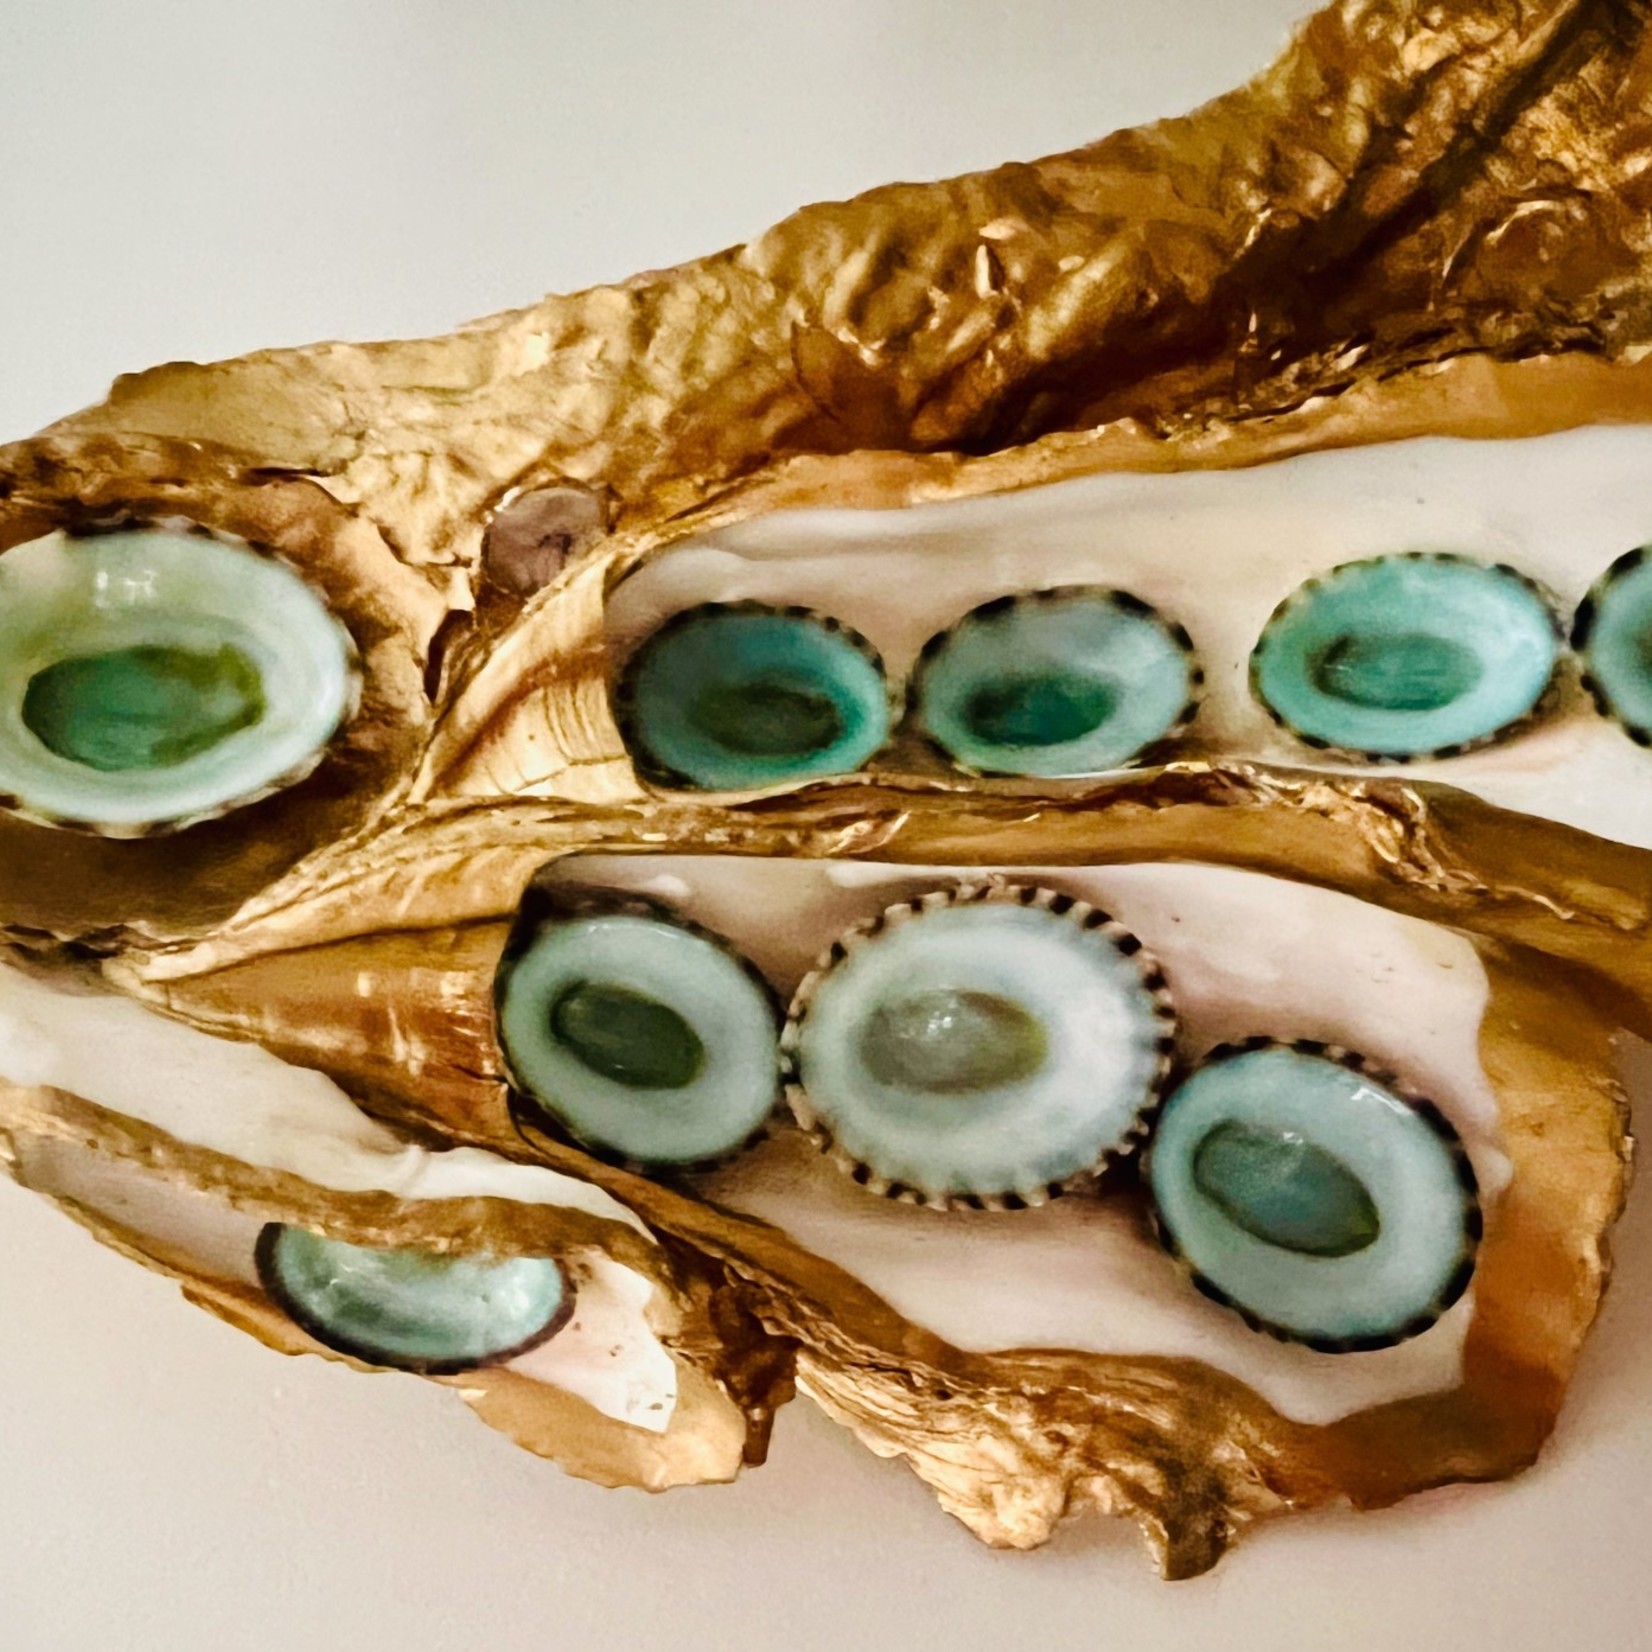 Pam Maschal Gold Leaf Wild Oyster cluster w/lturquoise Mexican limpets, PAMM